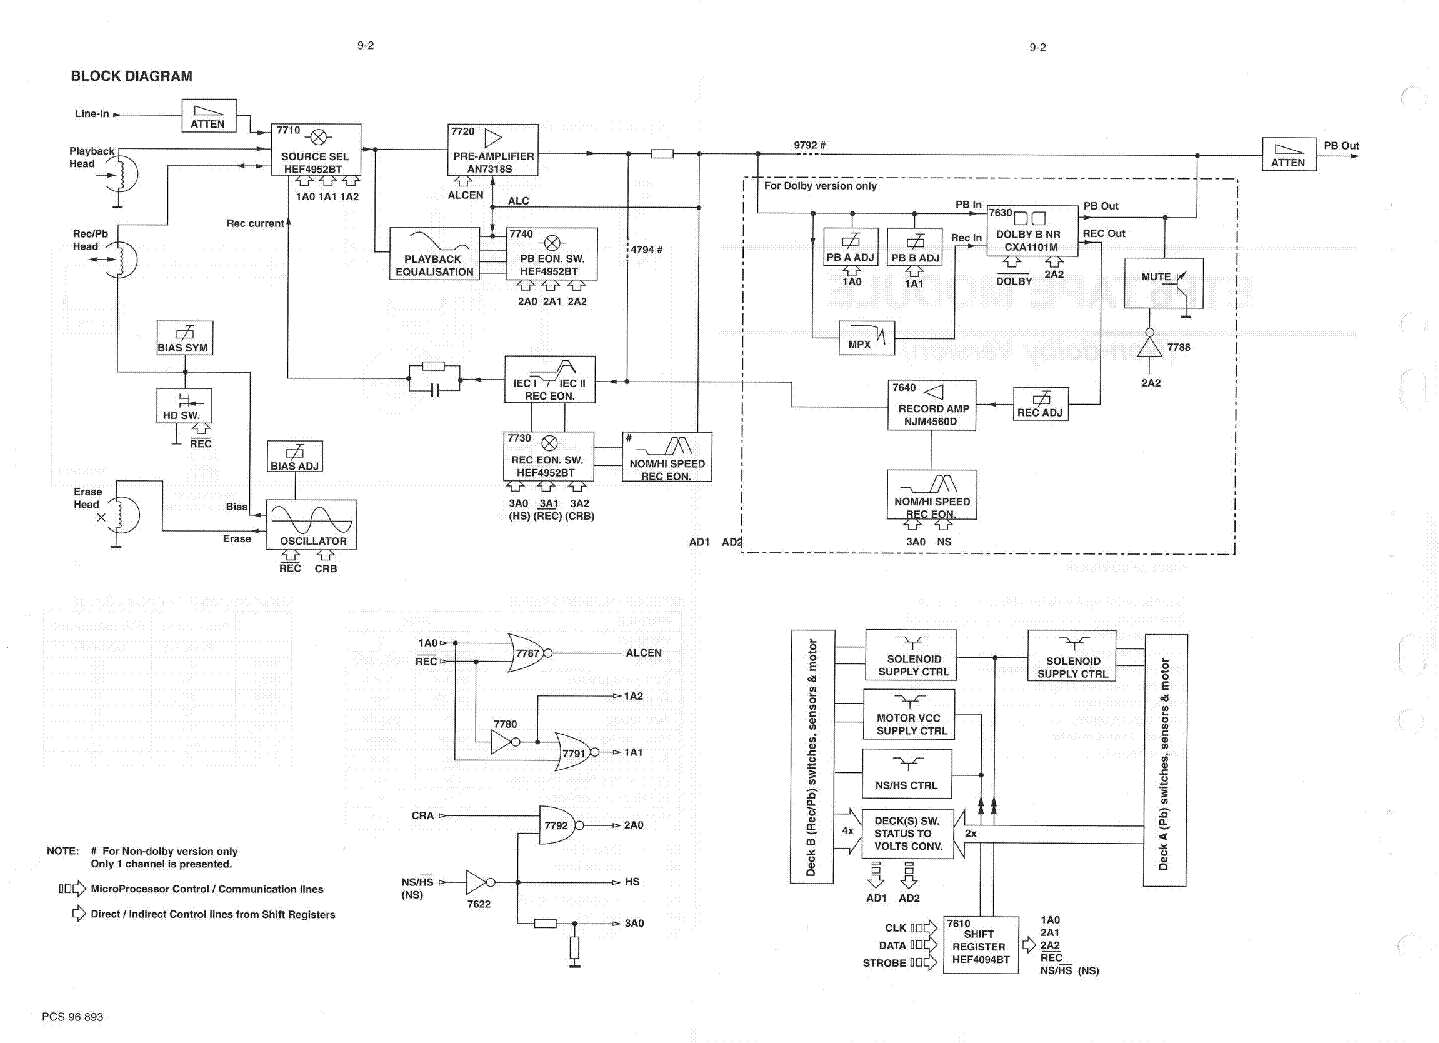 PHILIPS ETF6 TAPE MODULE NON DOLBY SM service manual (2nd page)